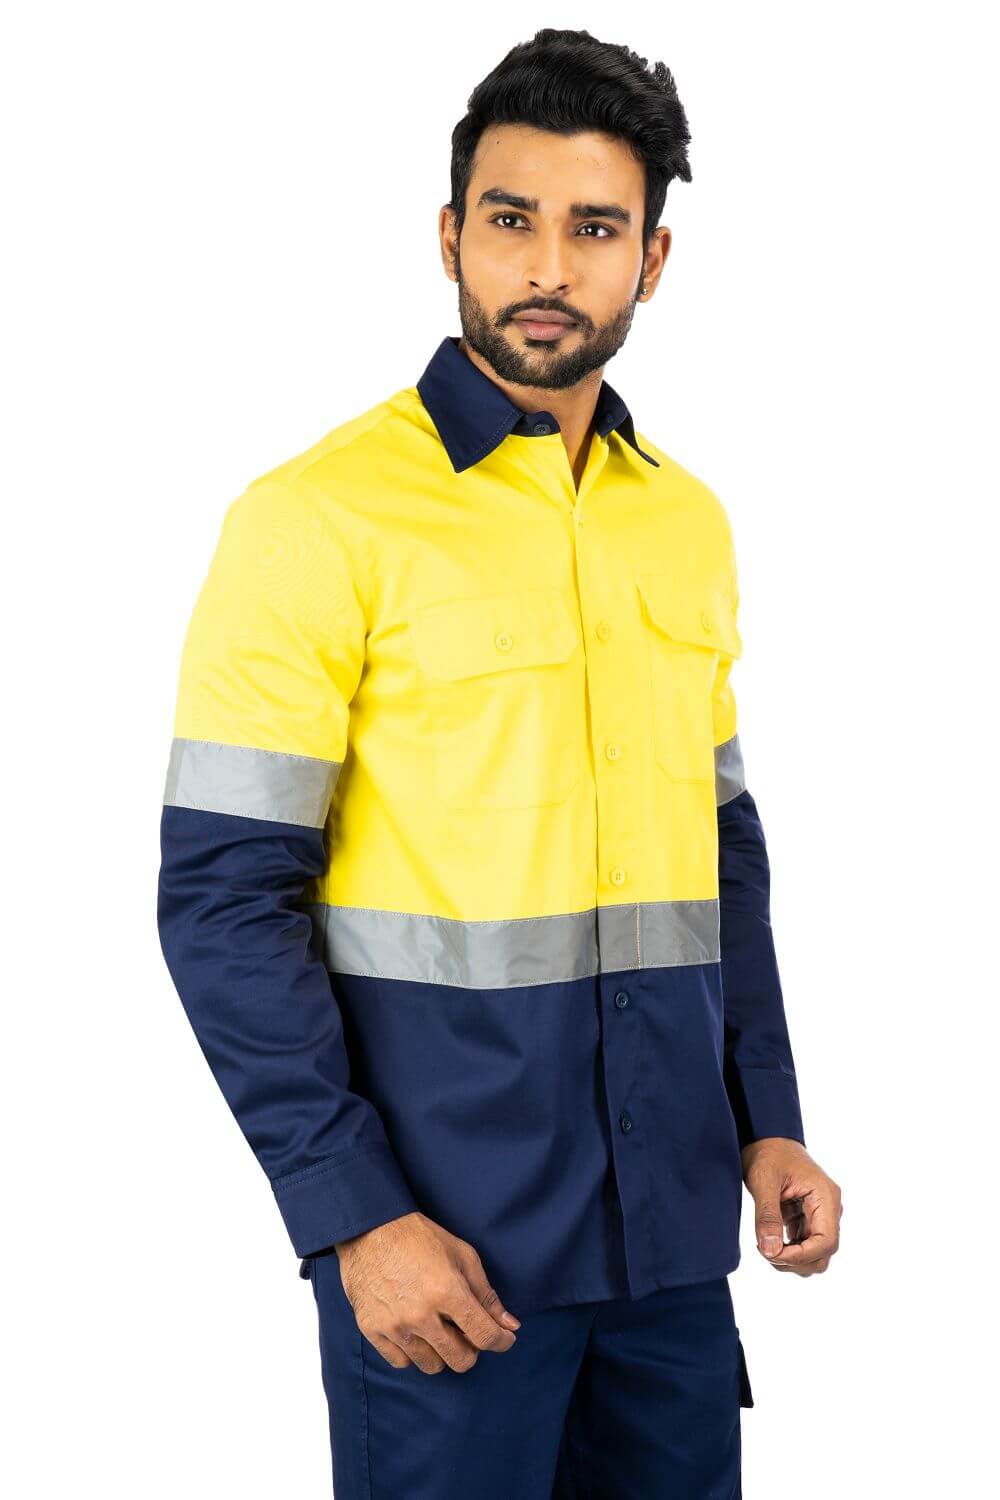 Hi-Viz dual-tone AS/NZS 4602.1:2011 standards compliant work shirt designed to provide optimum comfort and mobility during the strenuous hours at work.